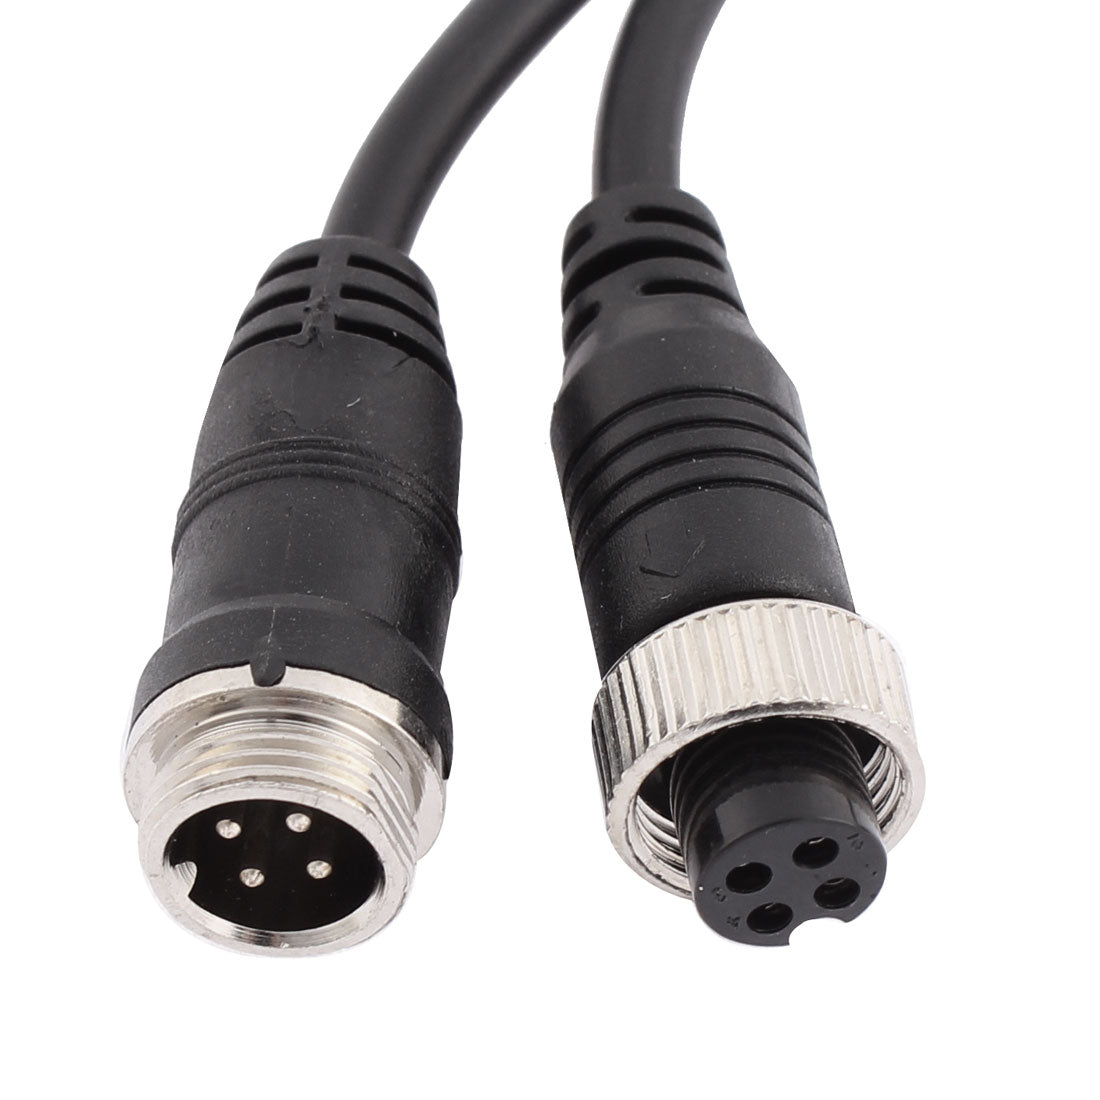 uxcell Uxcell Car Bus Monitor Camera Male to Female 4 Pin Video Power Extension Cable 5M 16ft